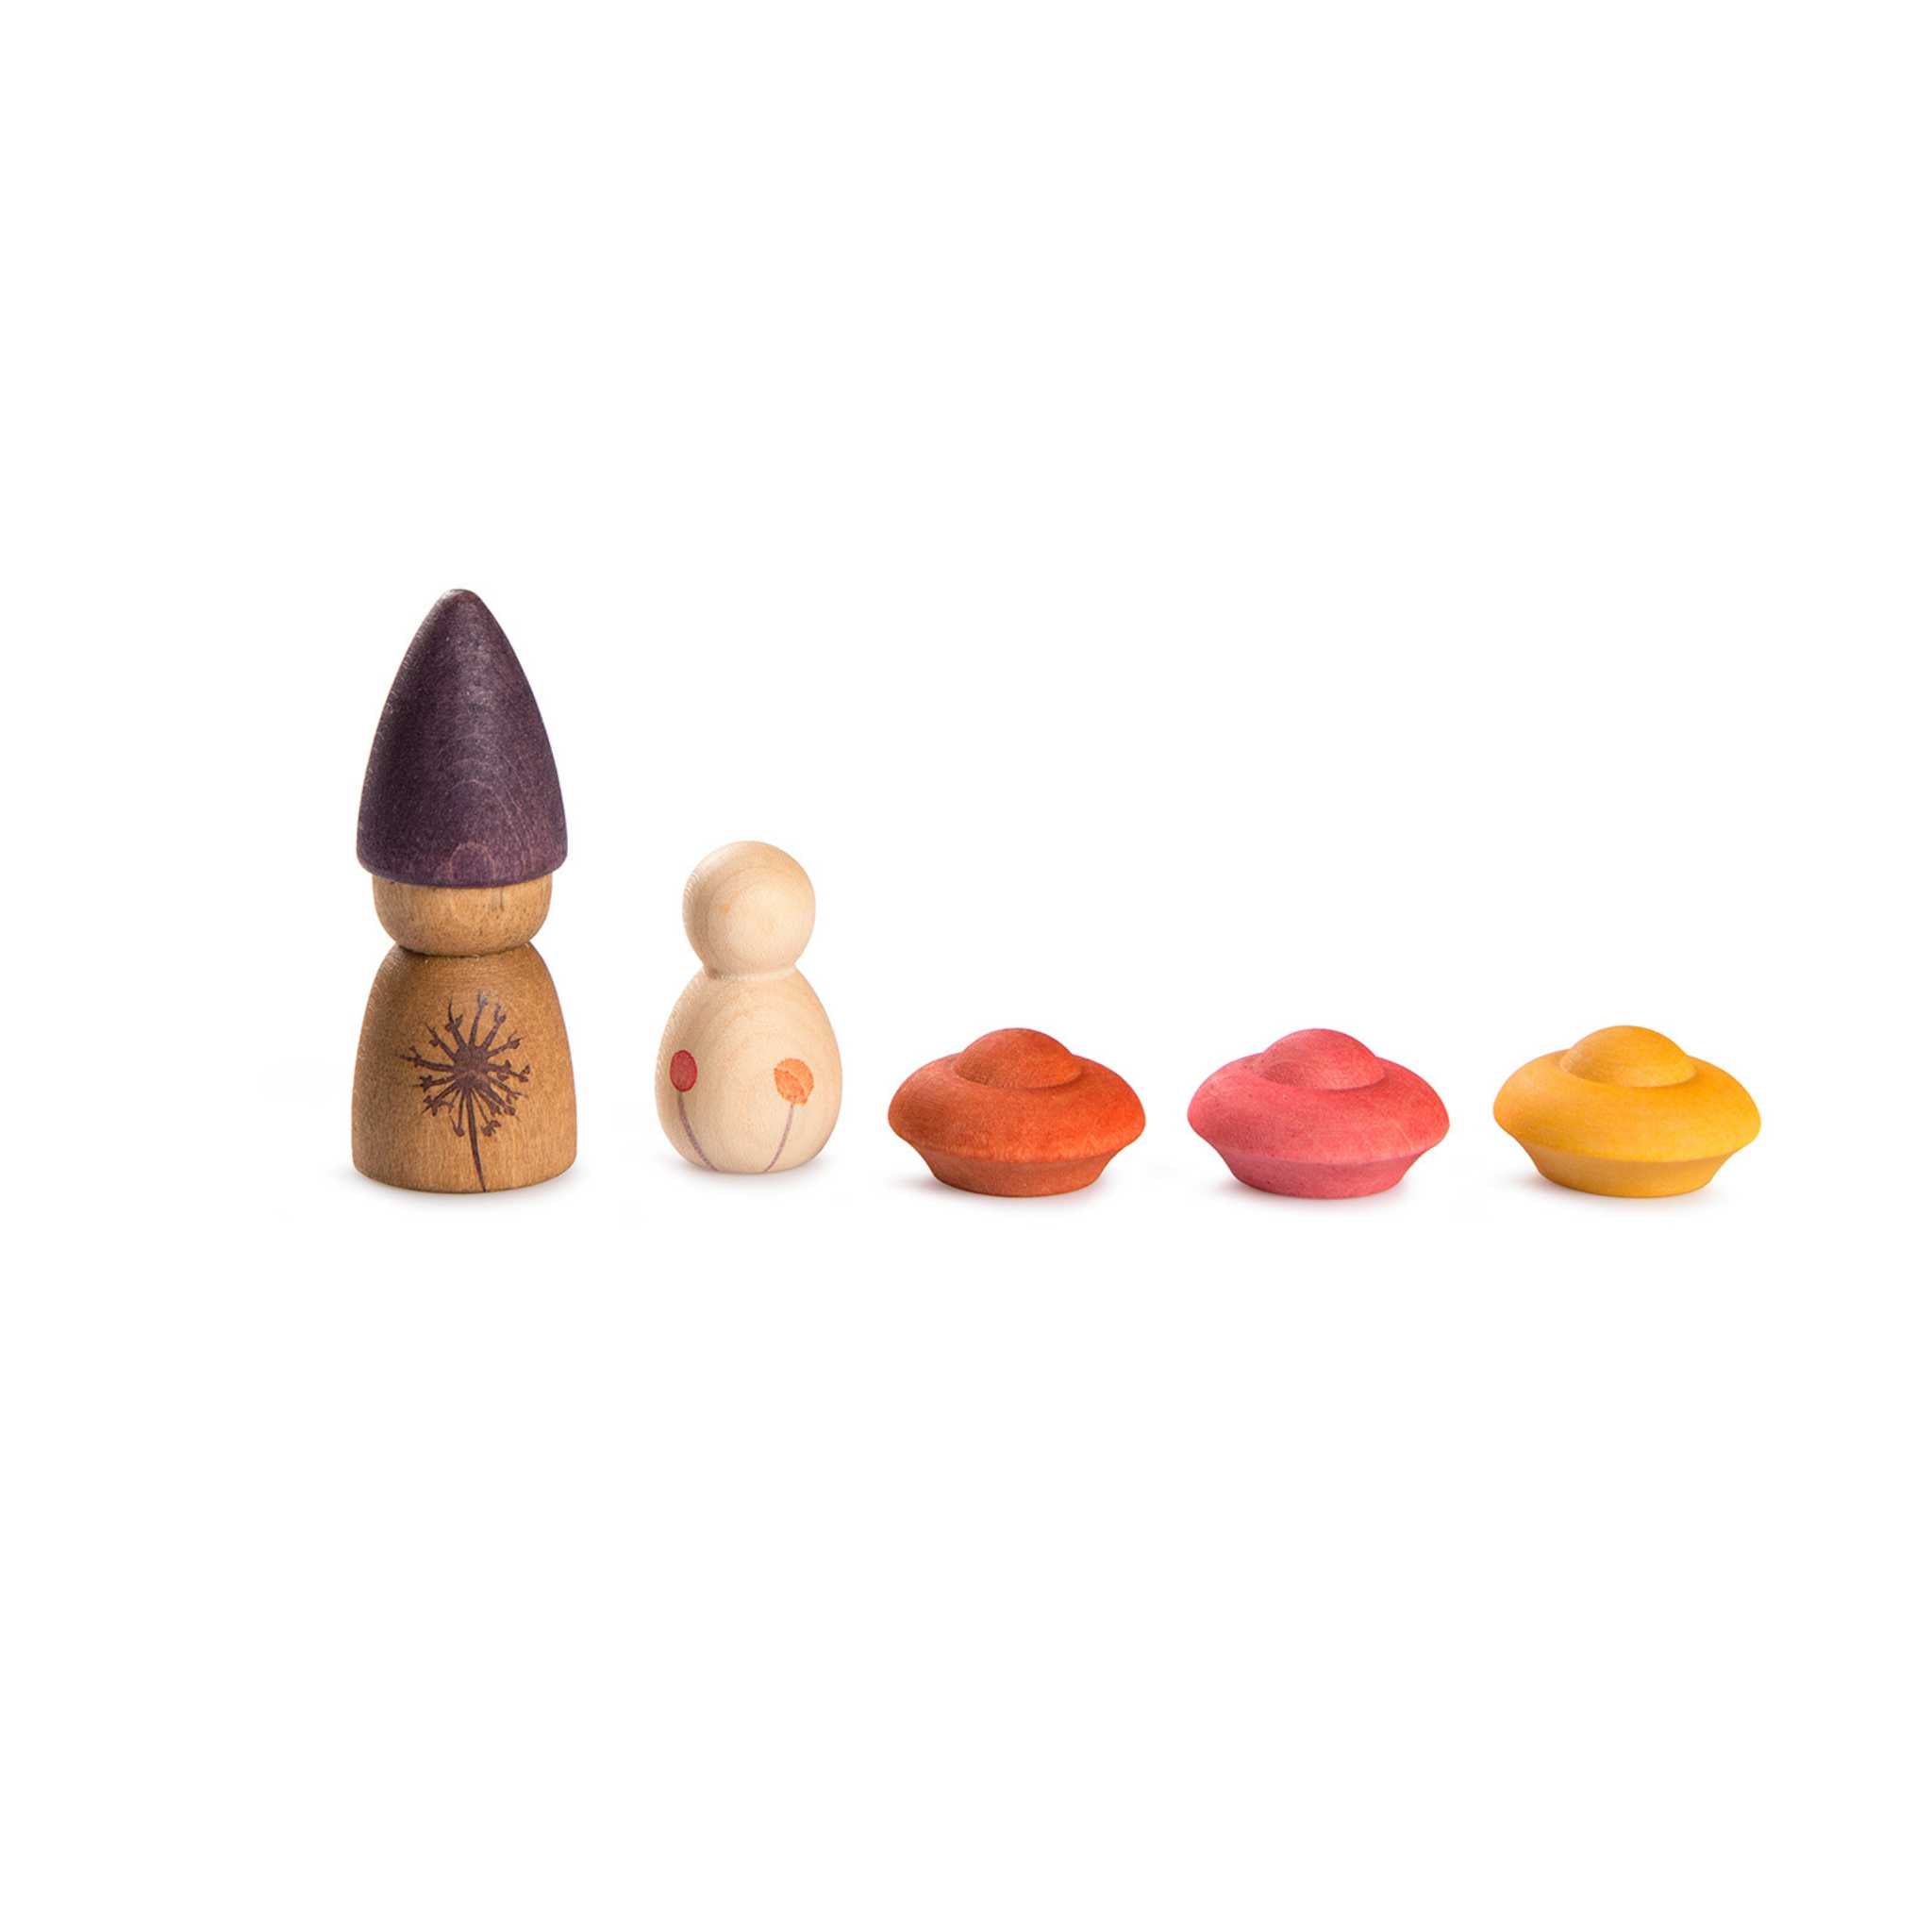 5 Wooden Toys From Grapat Lucky Lucky Collection on White Background